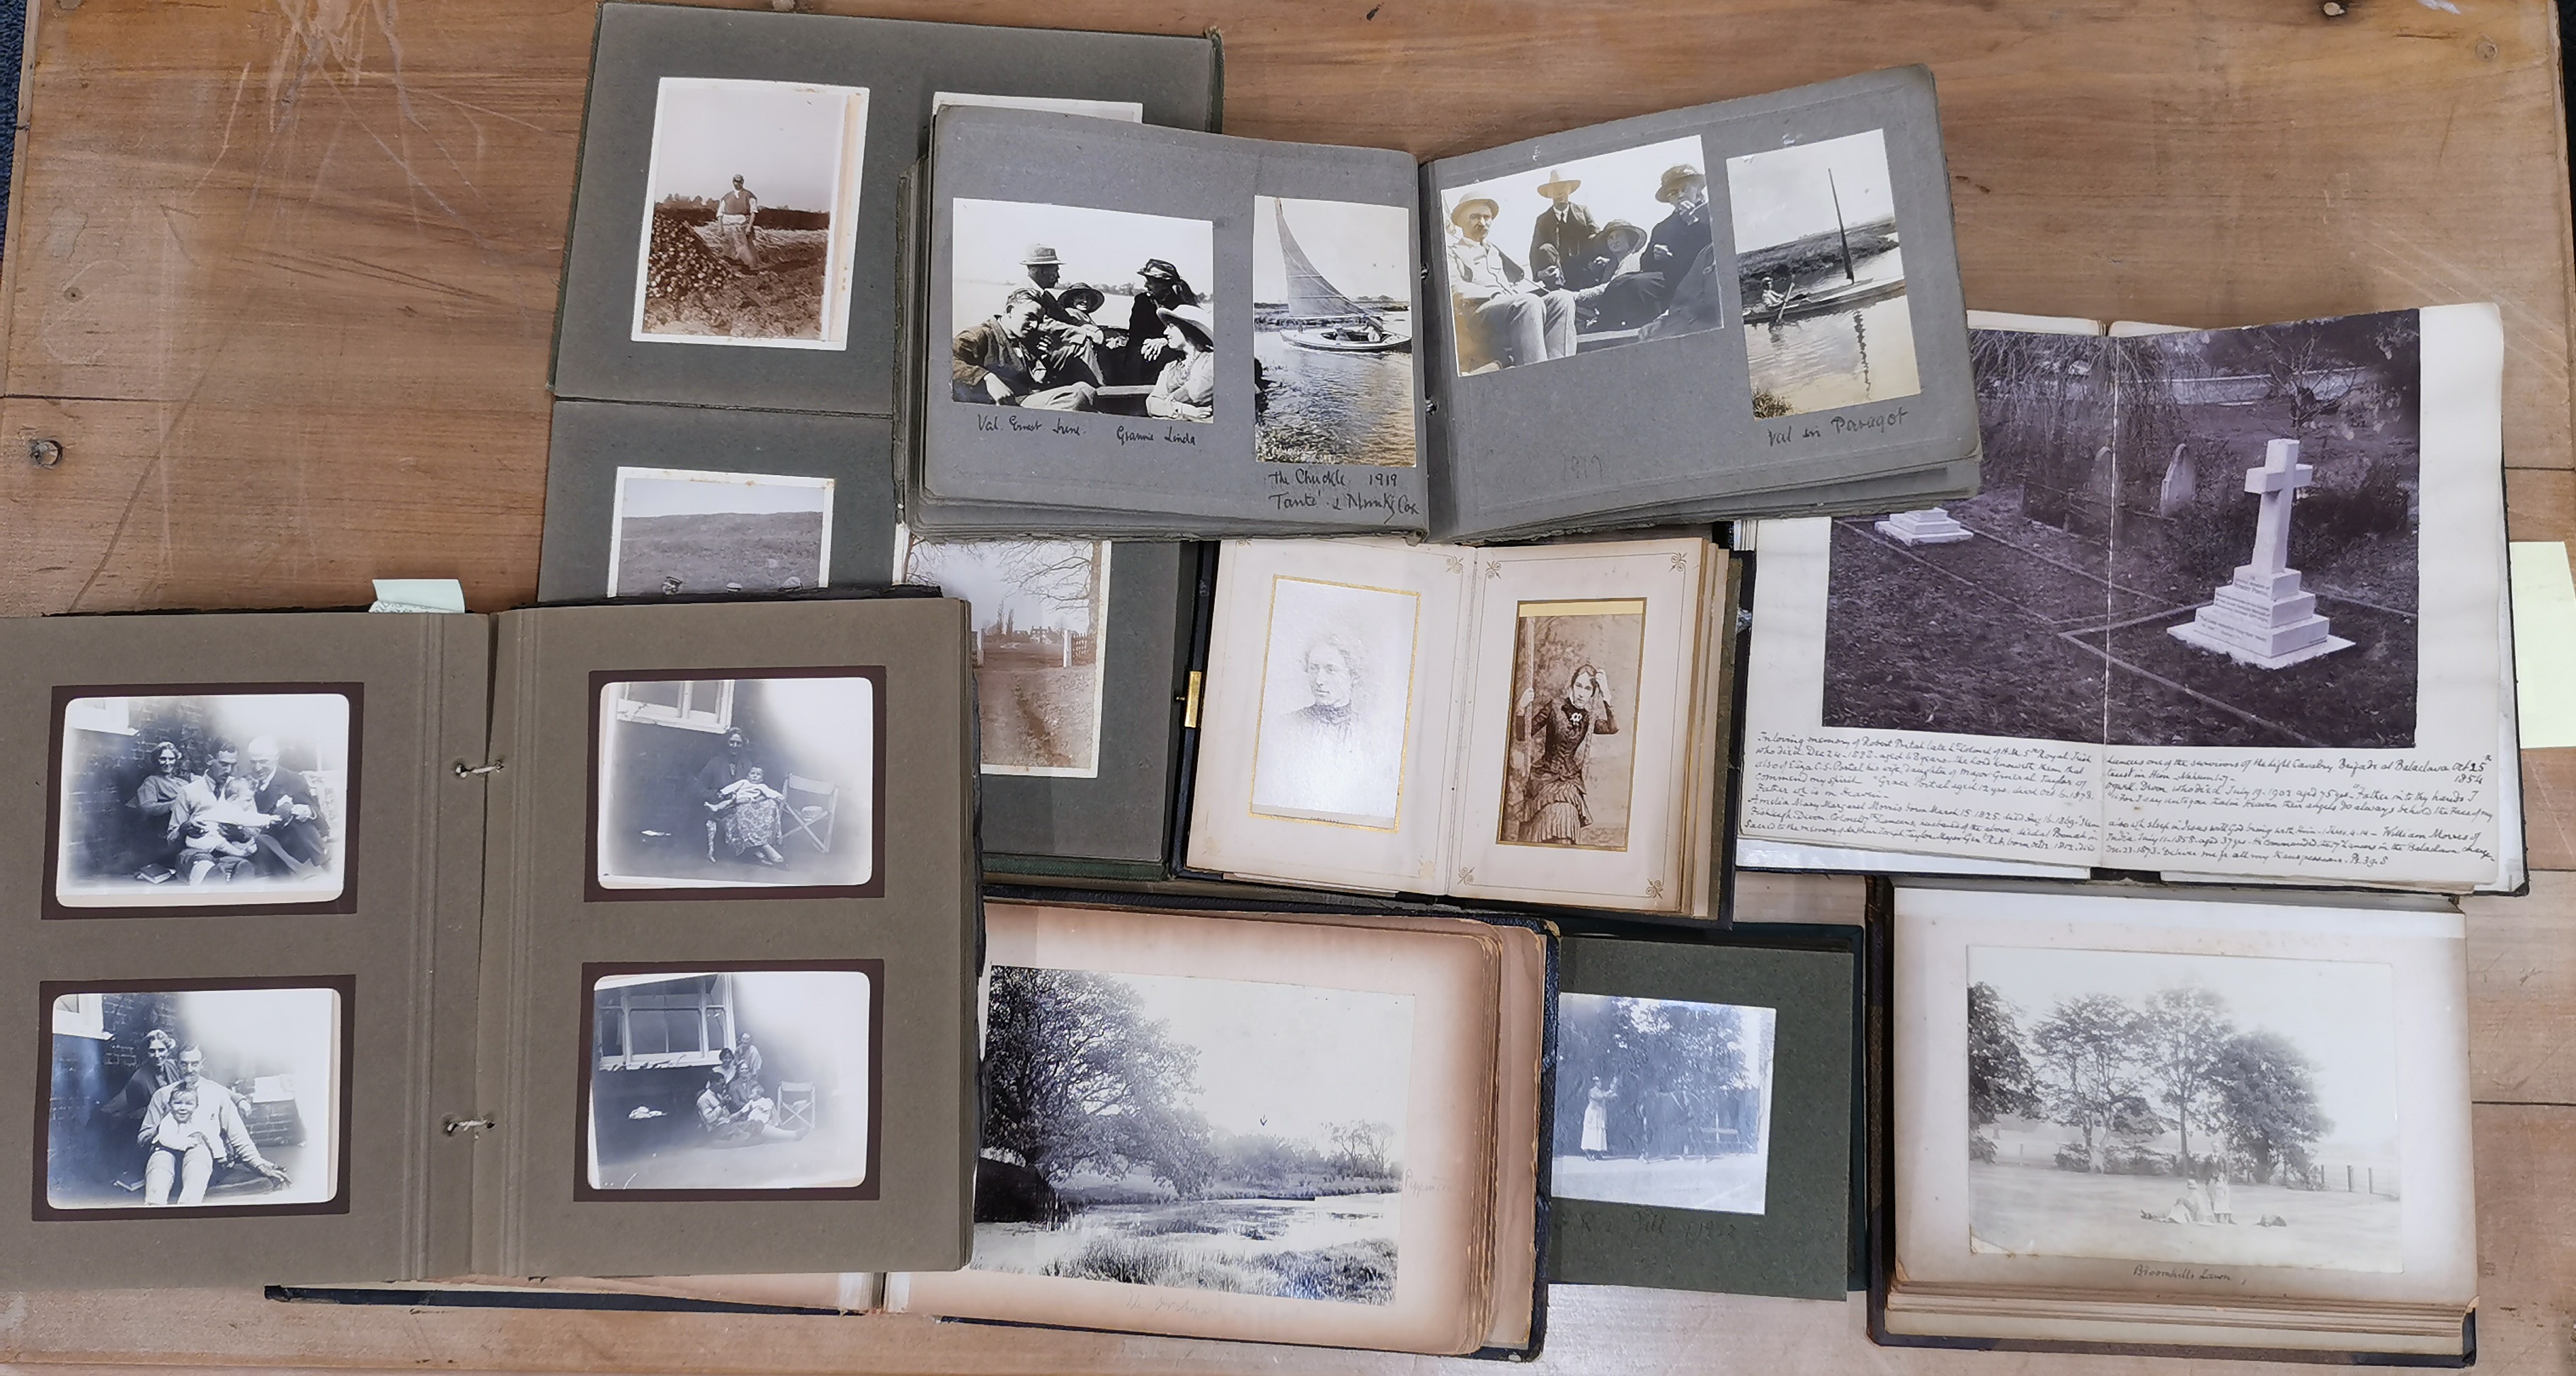 A group of early photograph albums relating to Stambridge and the Rochford area.